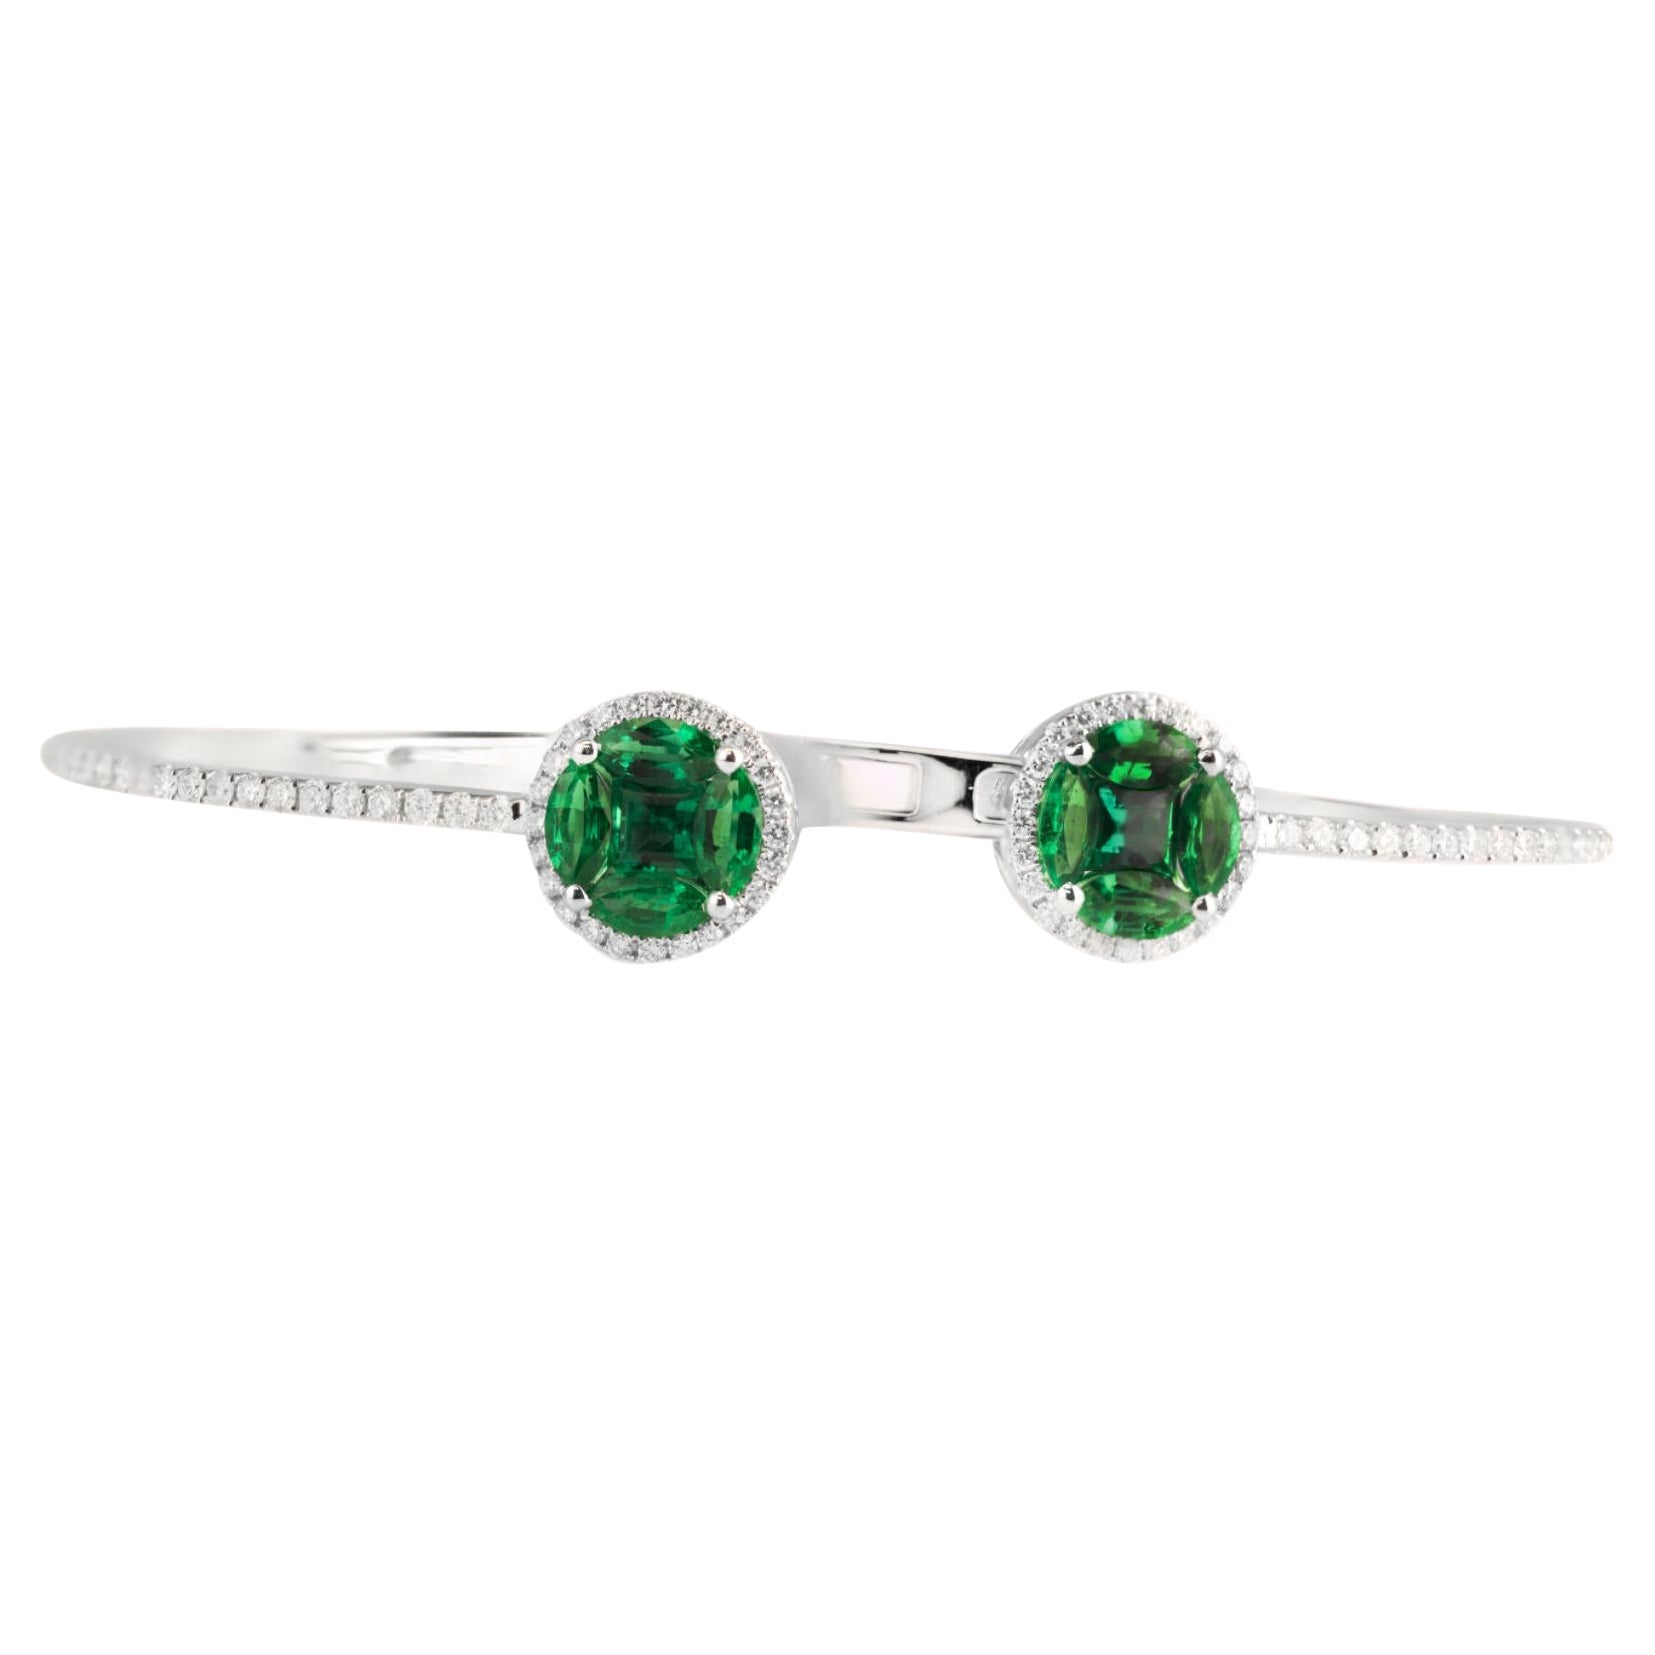 Diamond Town 1.21 Carat Emerald and Diamond Bangle in 18k White Gold For Sale